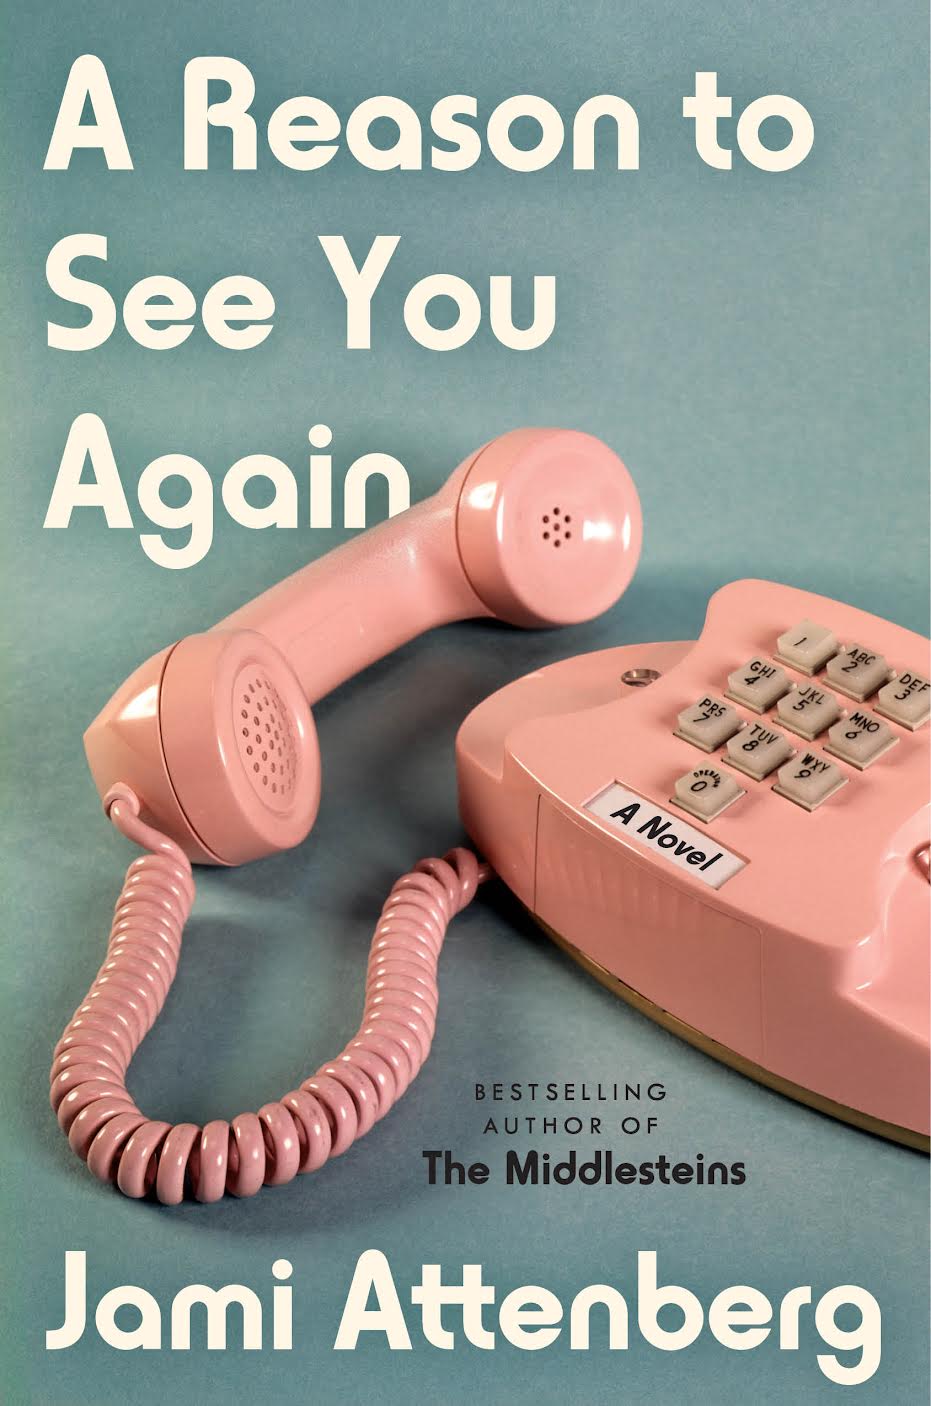 Book Cover Image of “A Reason To See You Again”